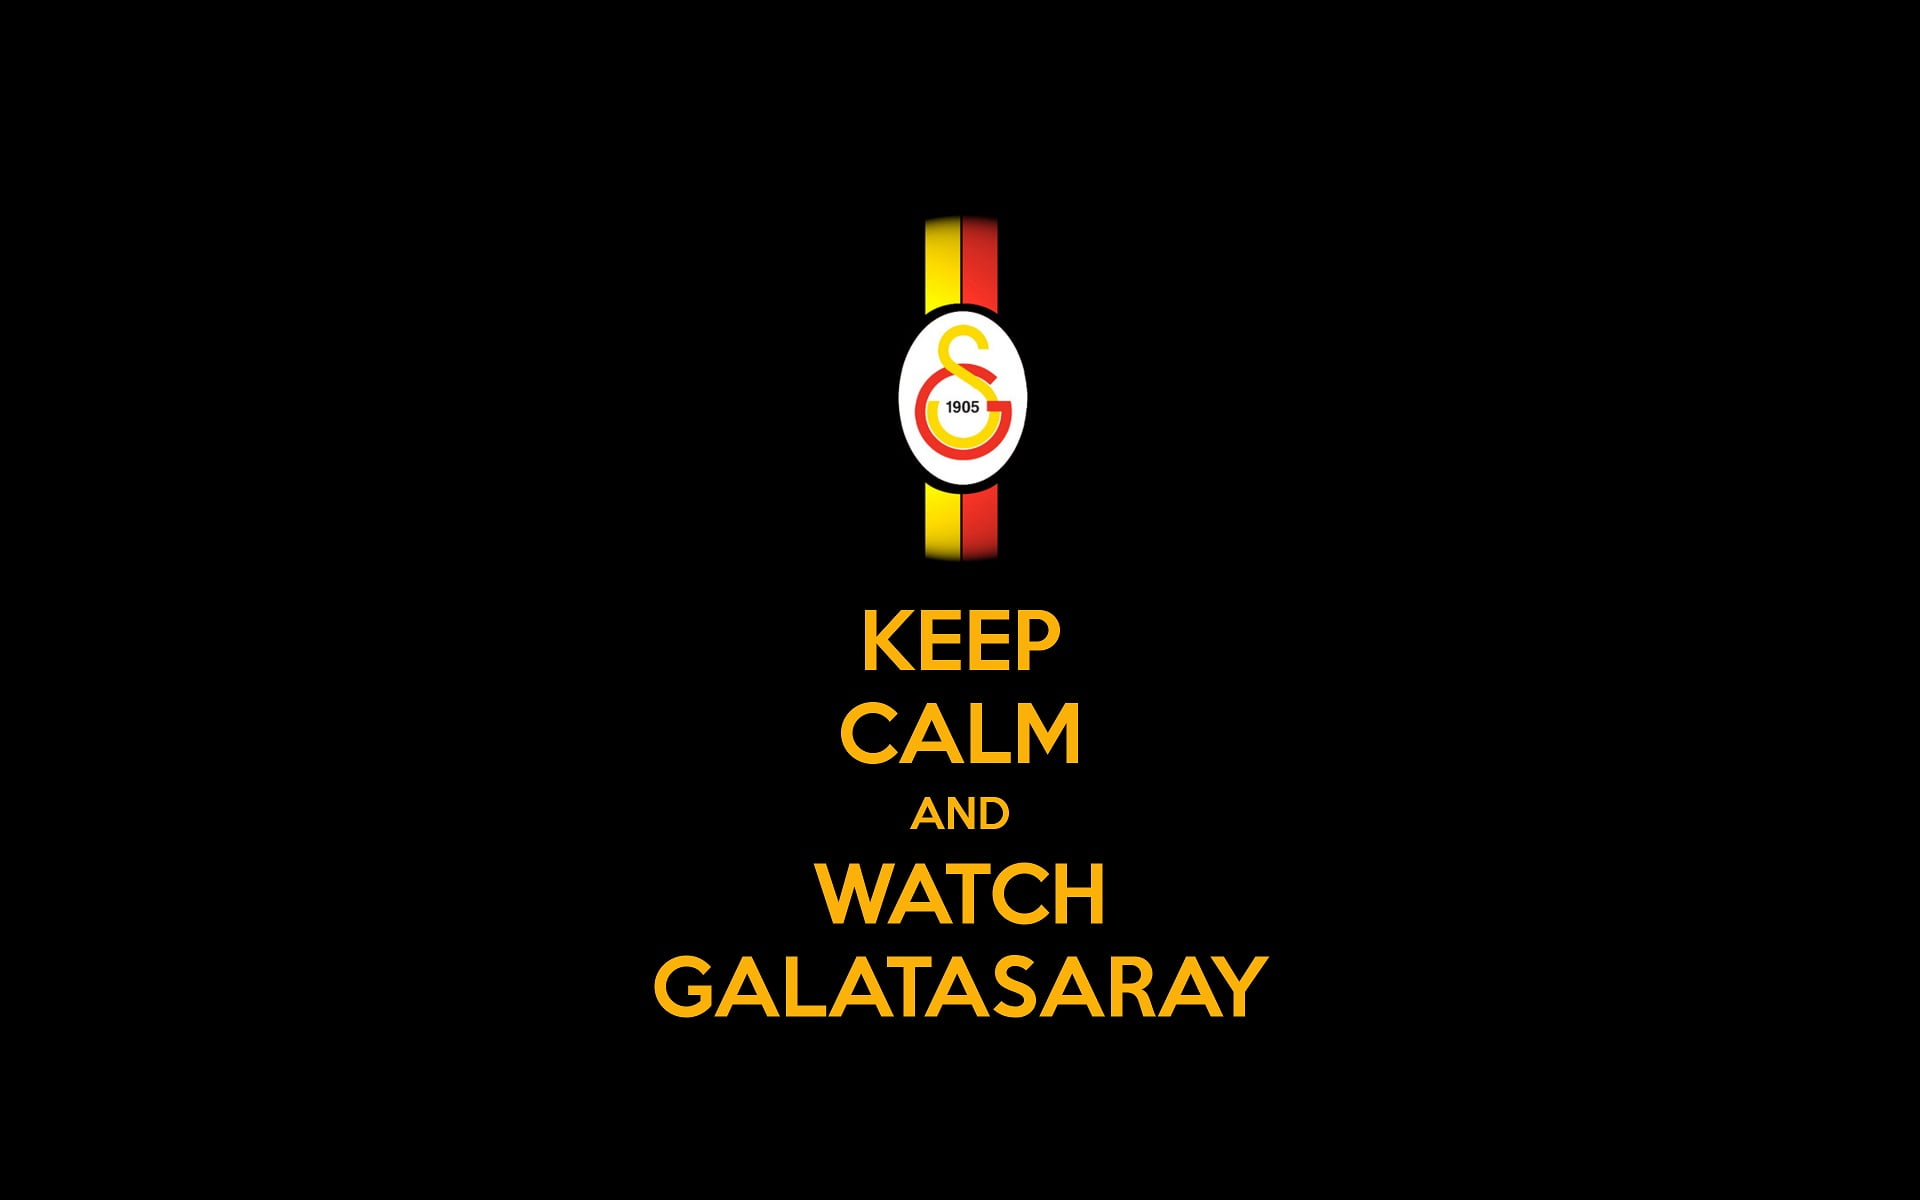 Keep Calm and Watch Galatasaray text, Keep Calm and..., Galatasaray S.K., sports, sport 